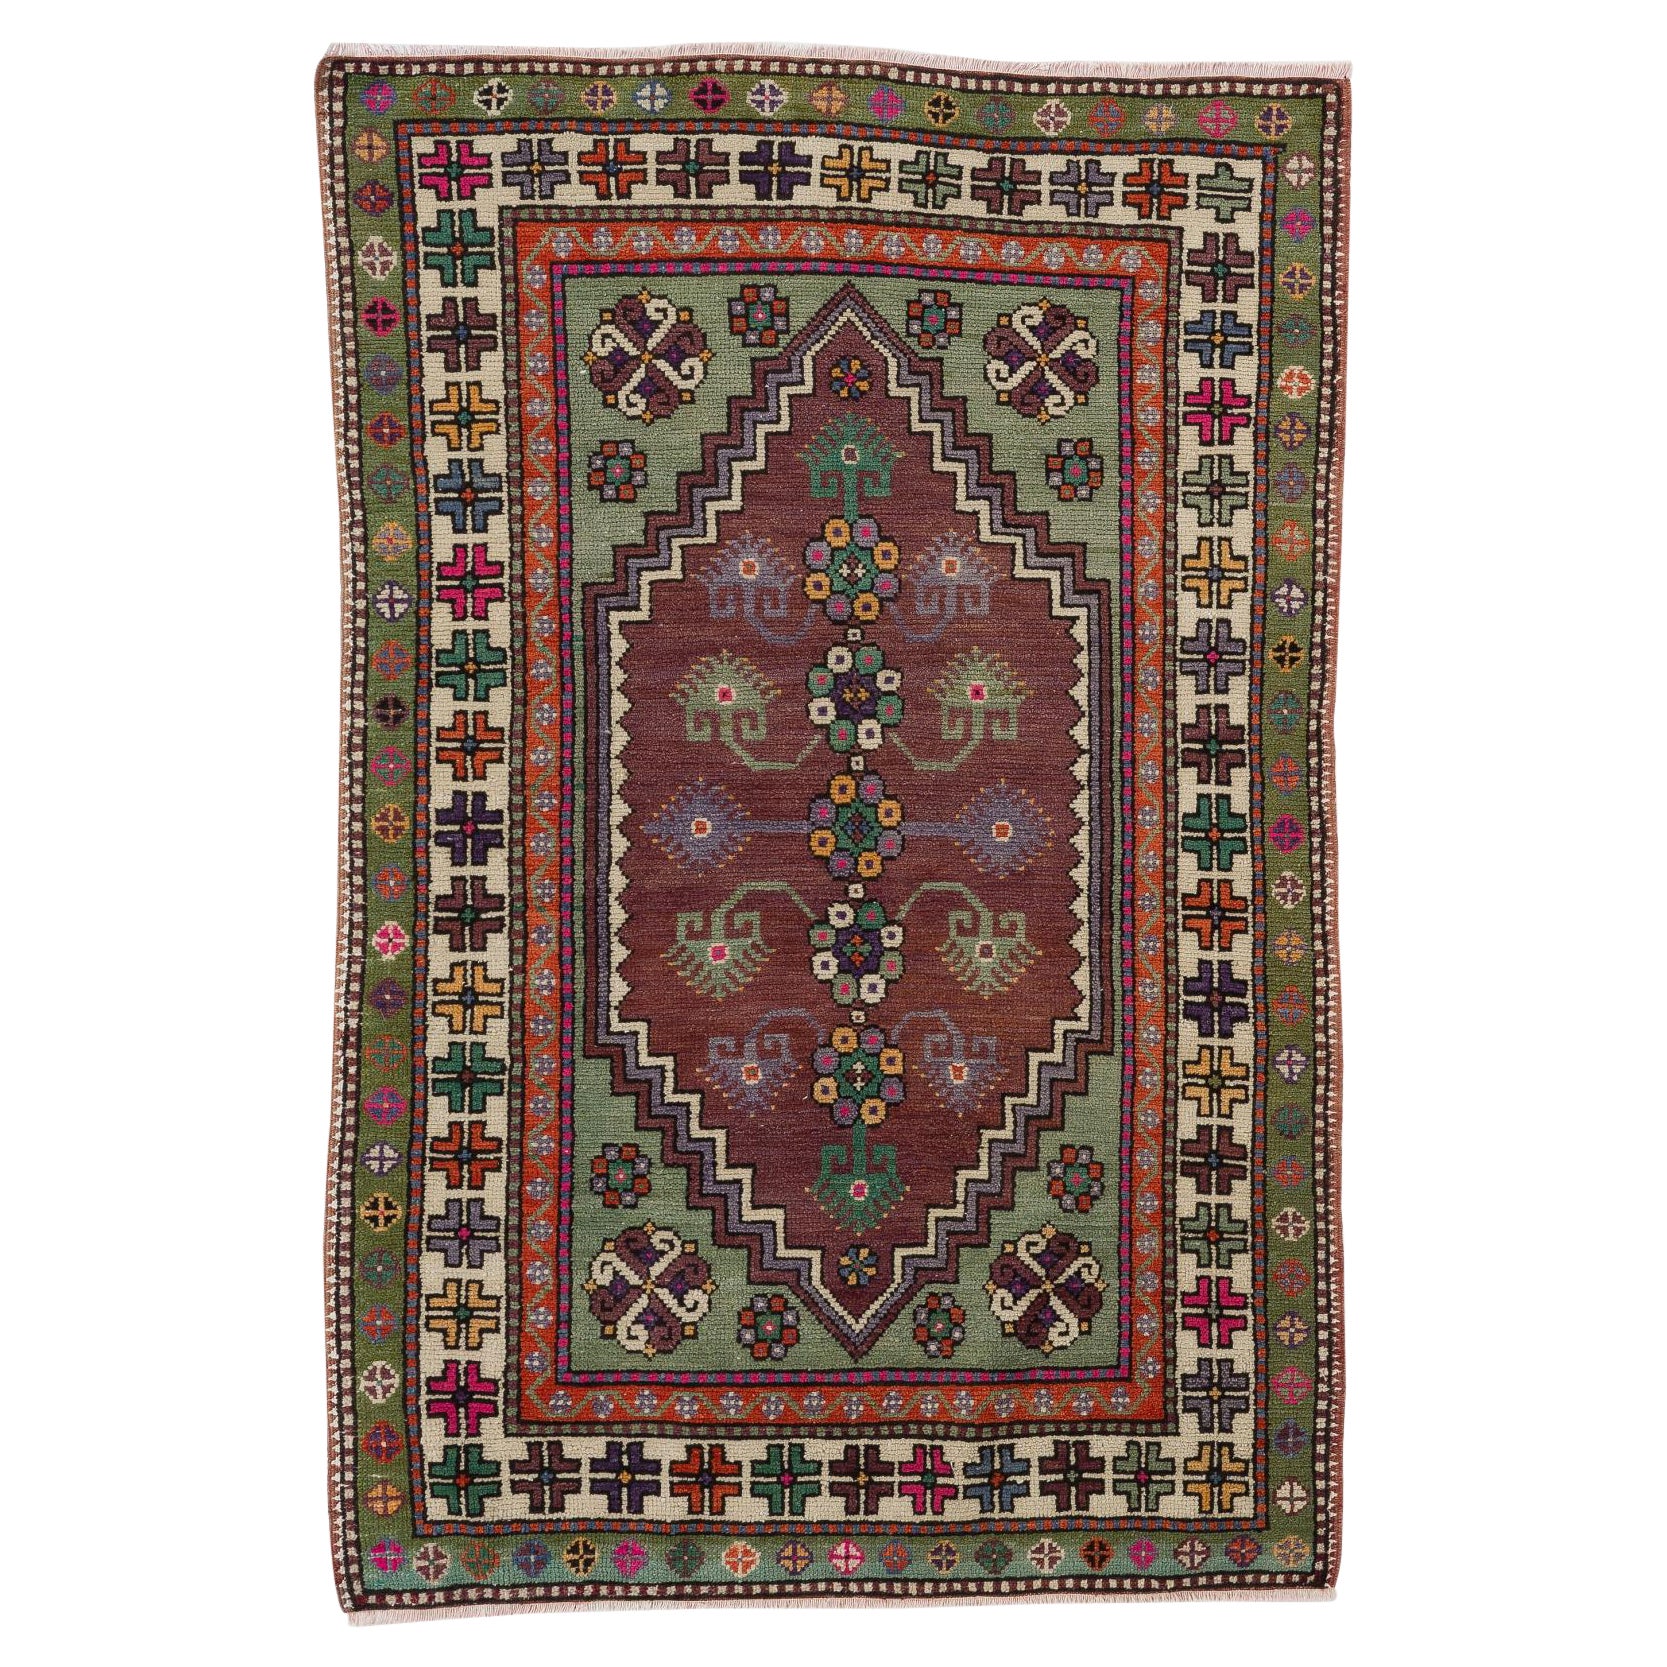 4.3x5.3 Ft Traditional Hand-Knotted Vintage Anatolian Rug, Woolen Floor Covering